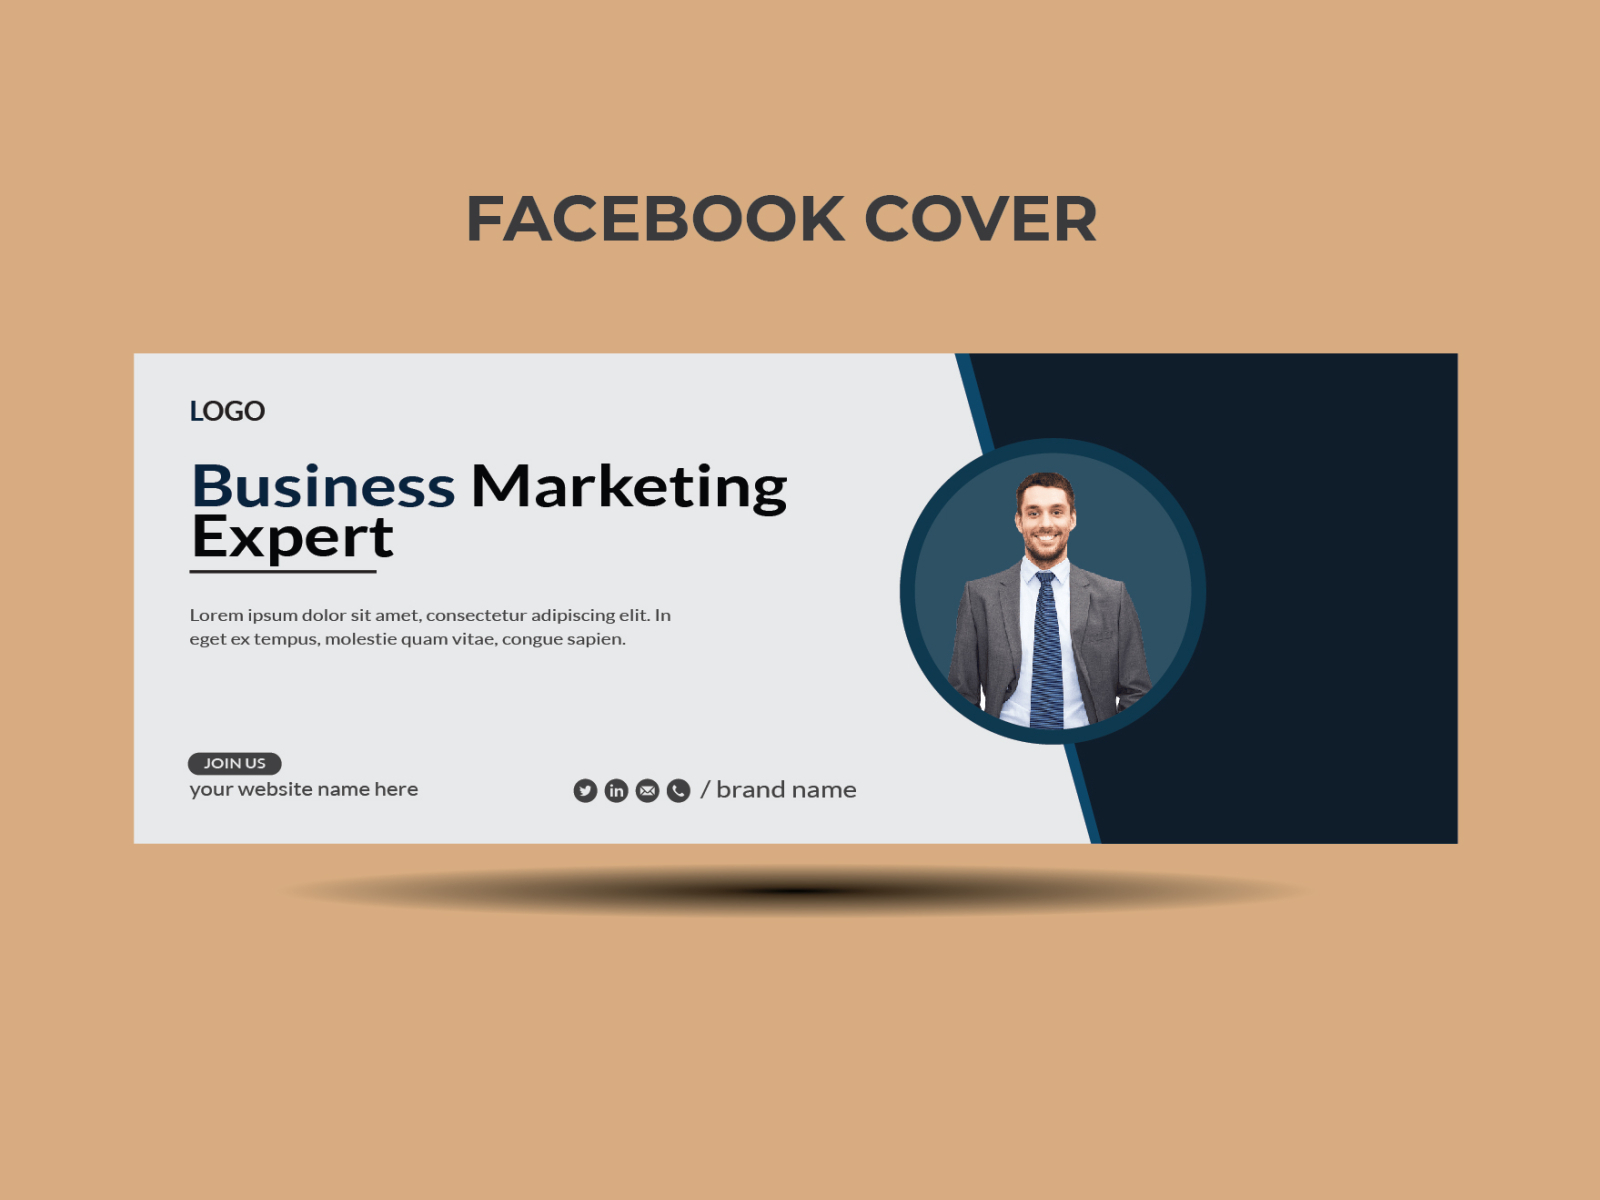 Facebook cover page Template by Ripon Ahmed on Dribbble